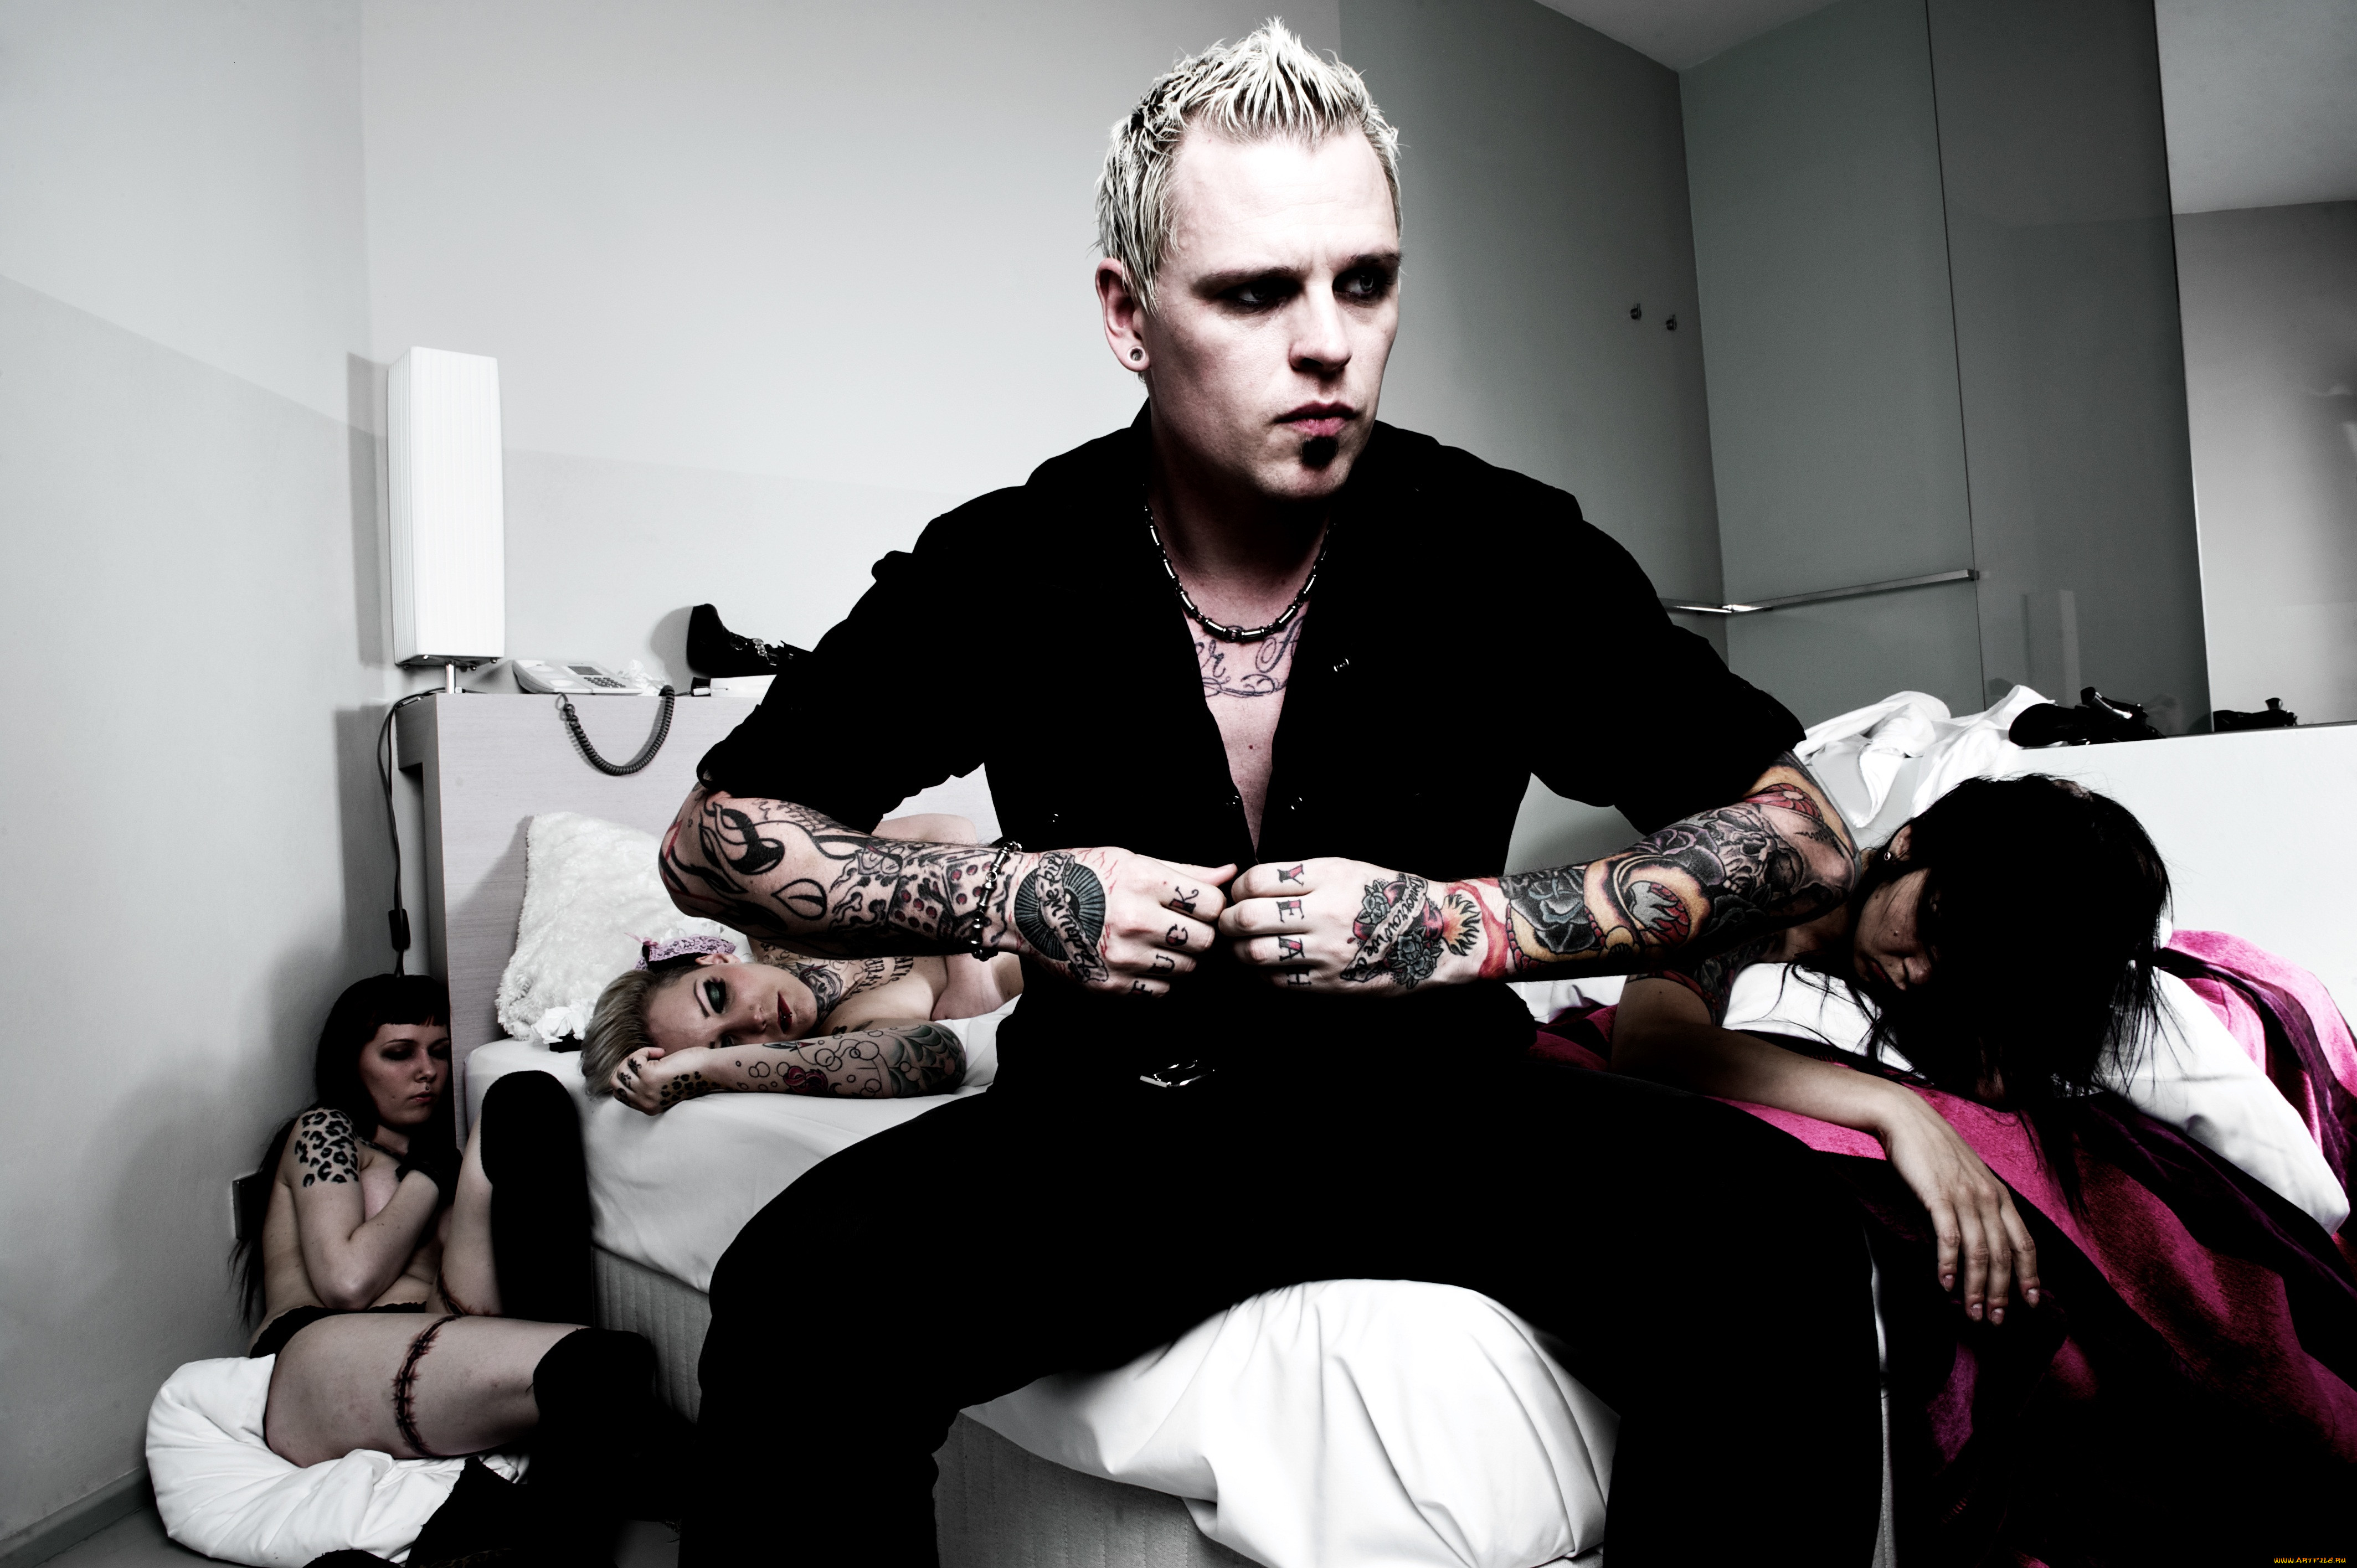 , combichrist, industrial, ebm, tbm, making, monsters, andy, laplegua